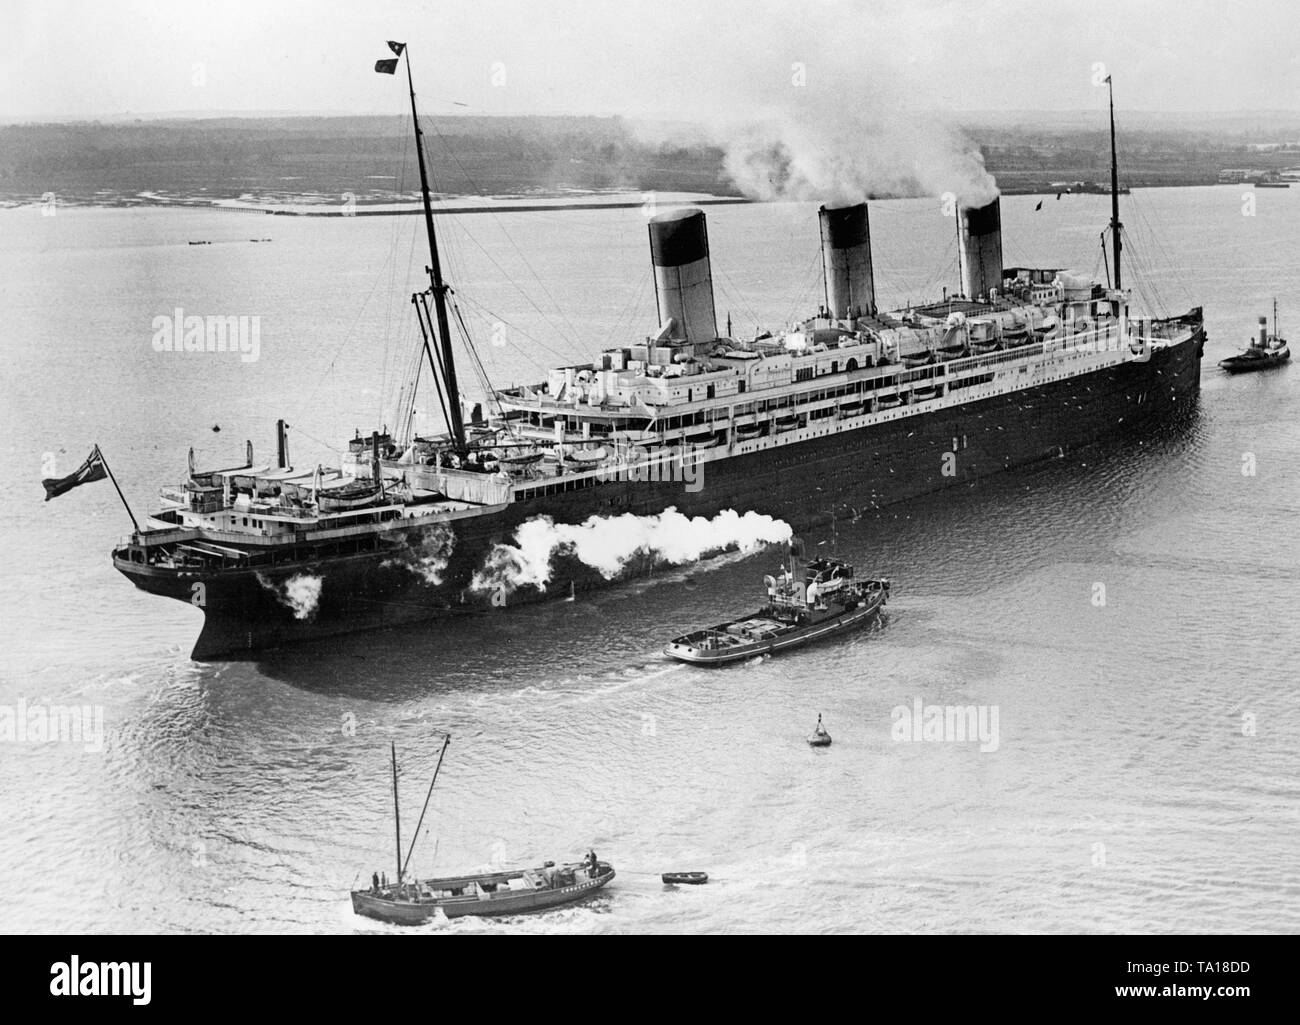 The 'Majestic' of the shipping company White Star Line enters the port of Southampton after her last Atlantic crossing. Stock Photo